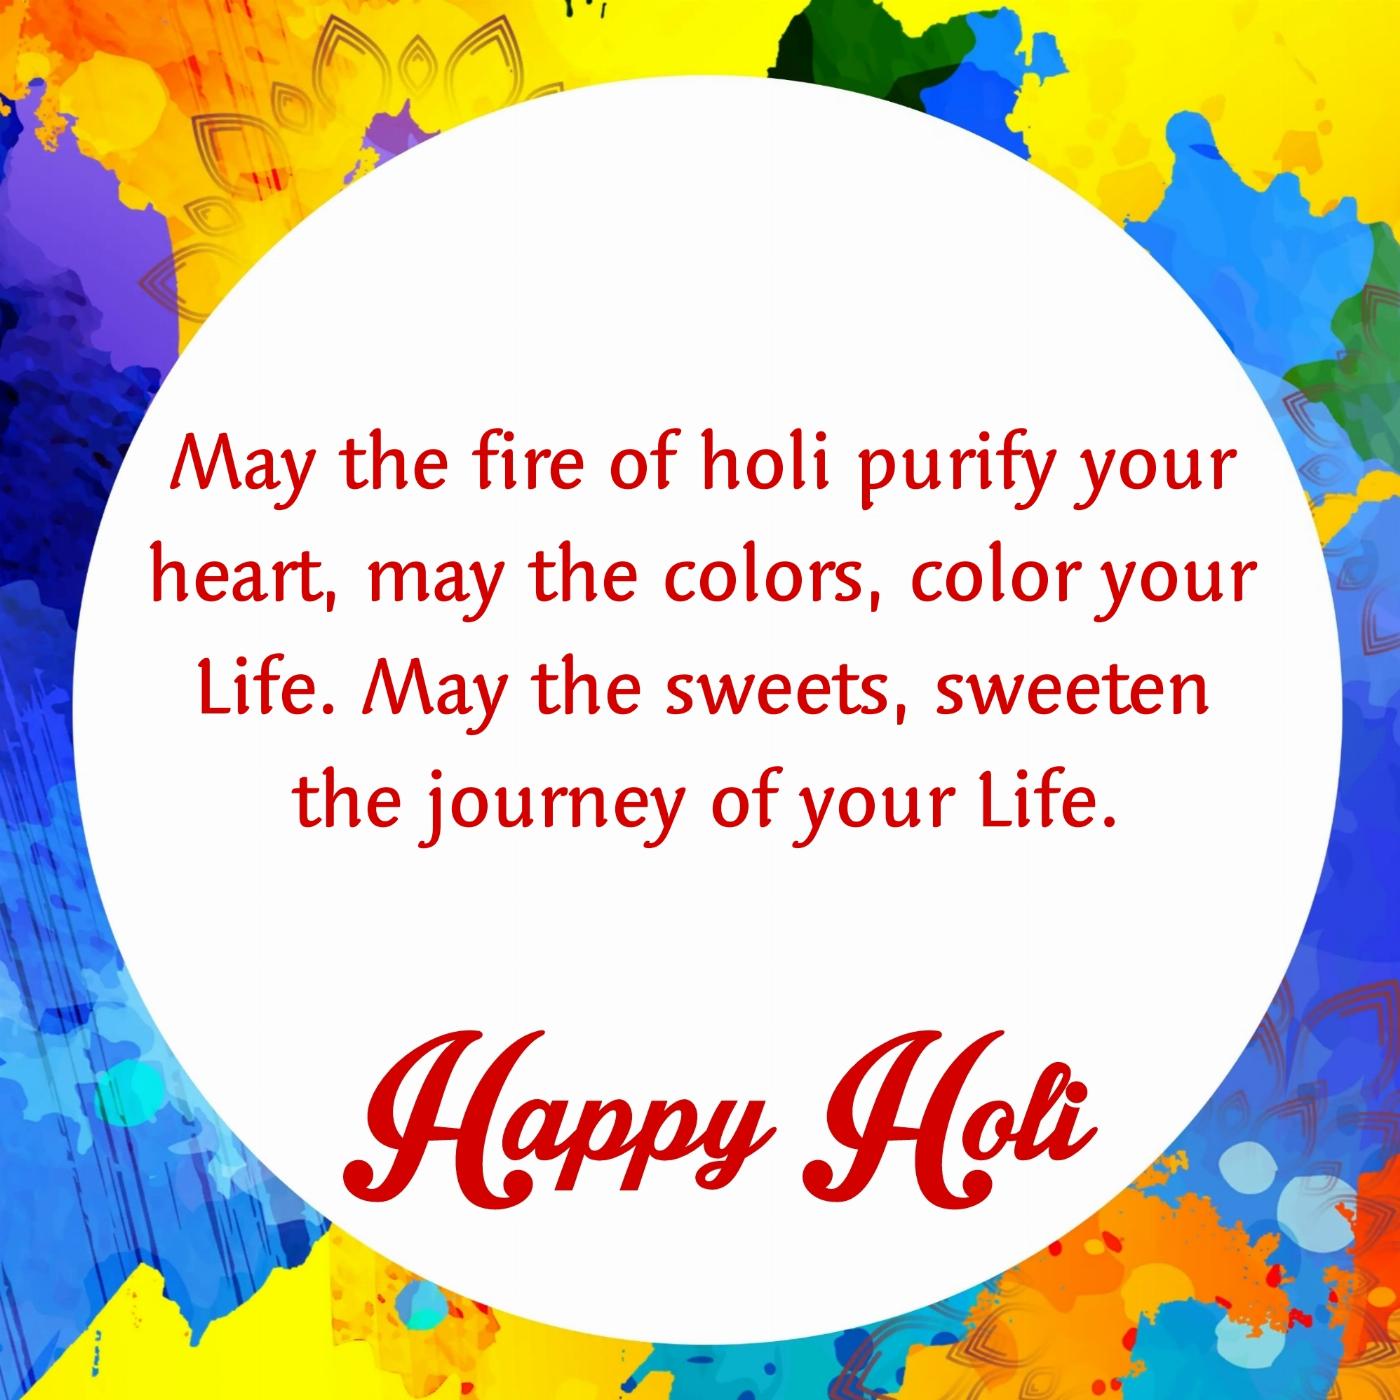 May the fire of holi purify your heart may the colors color your Life